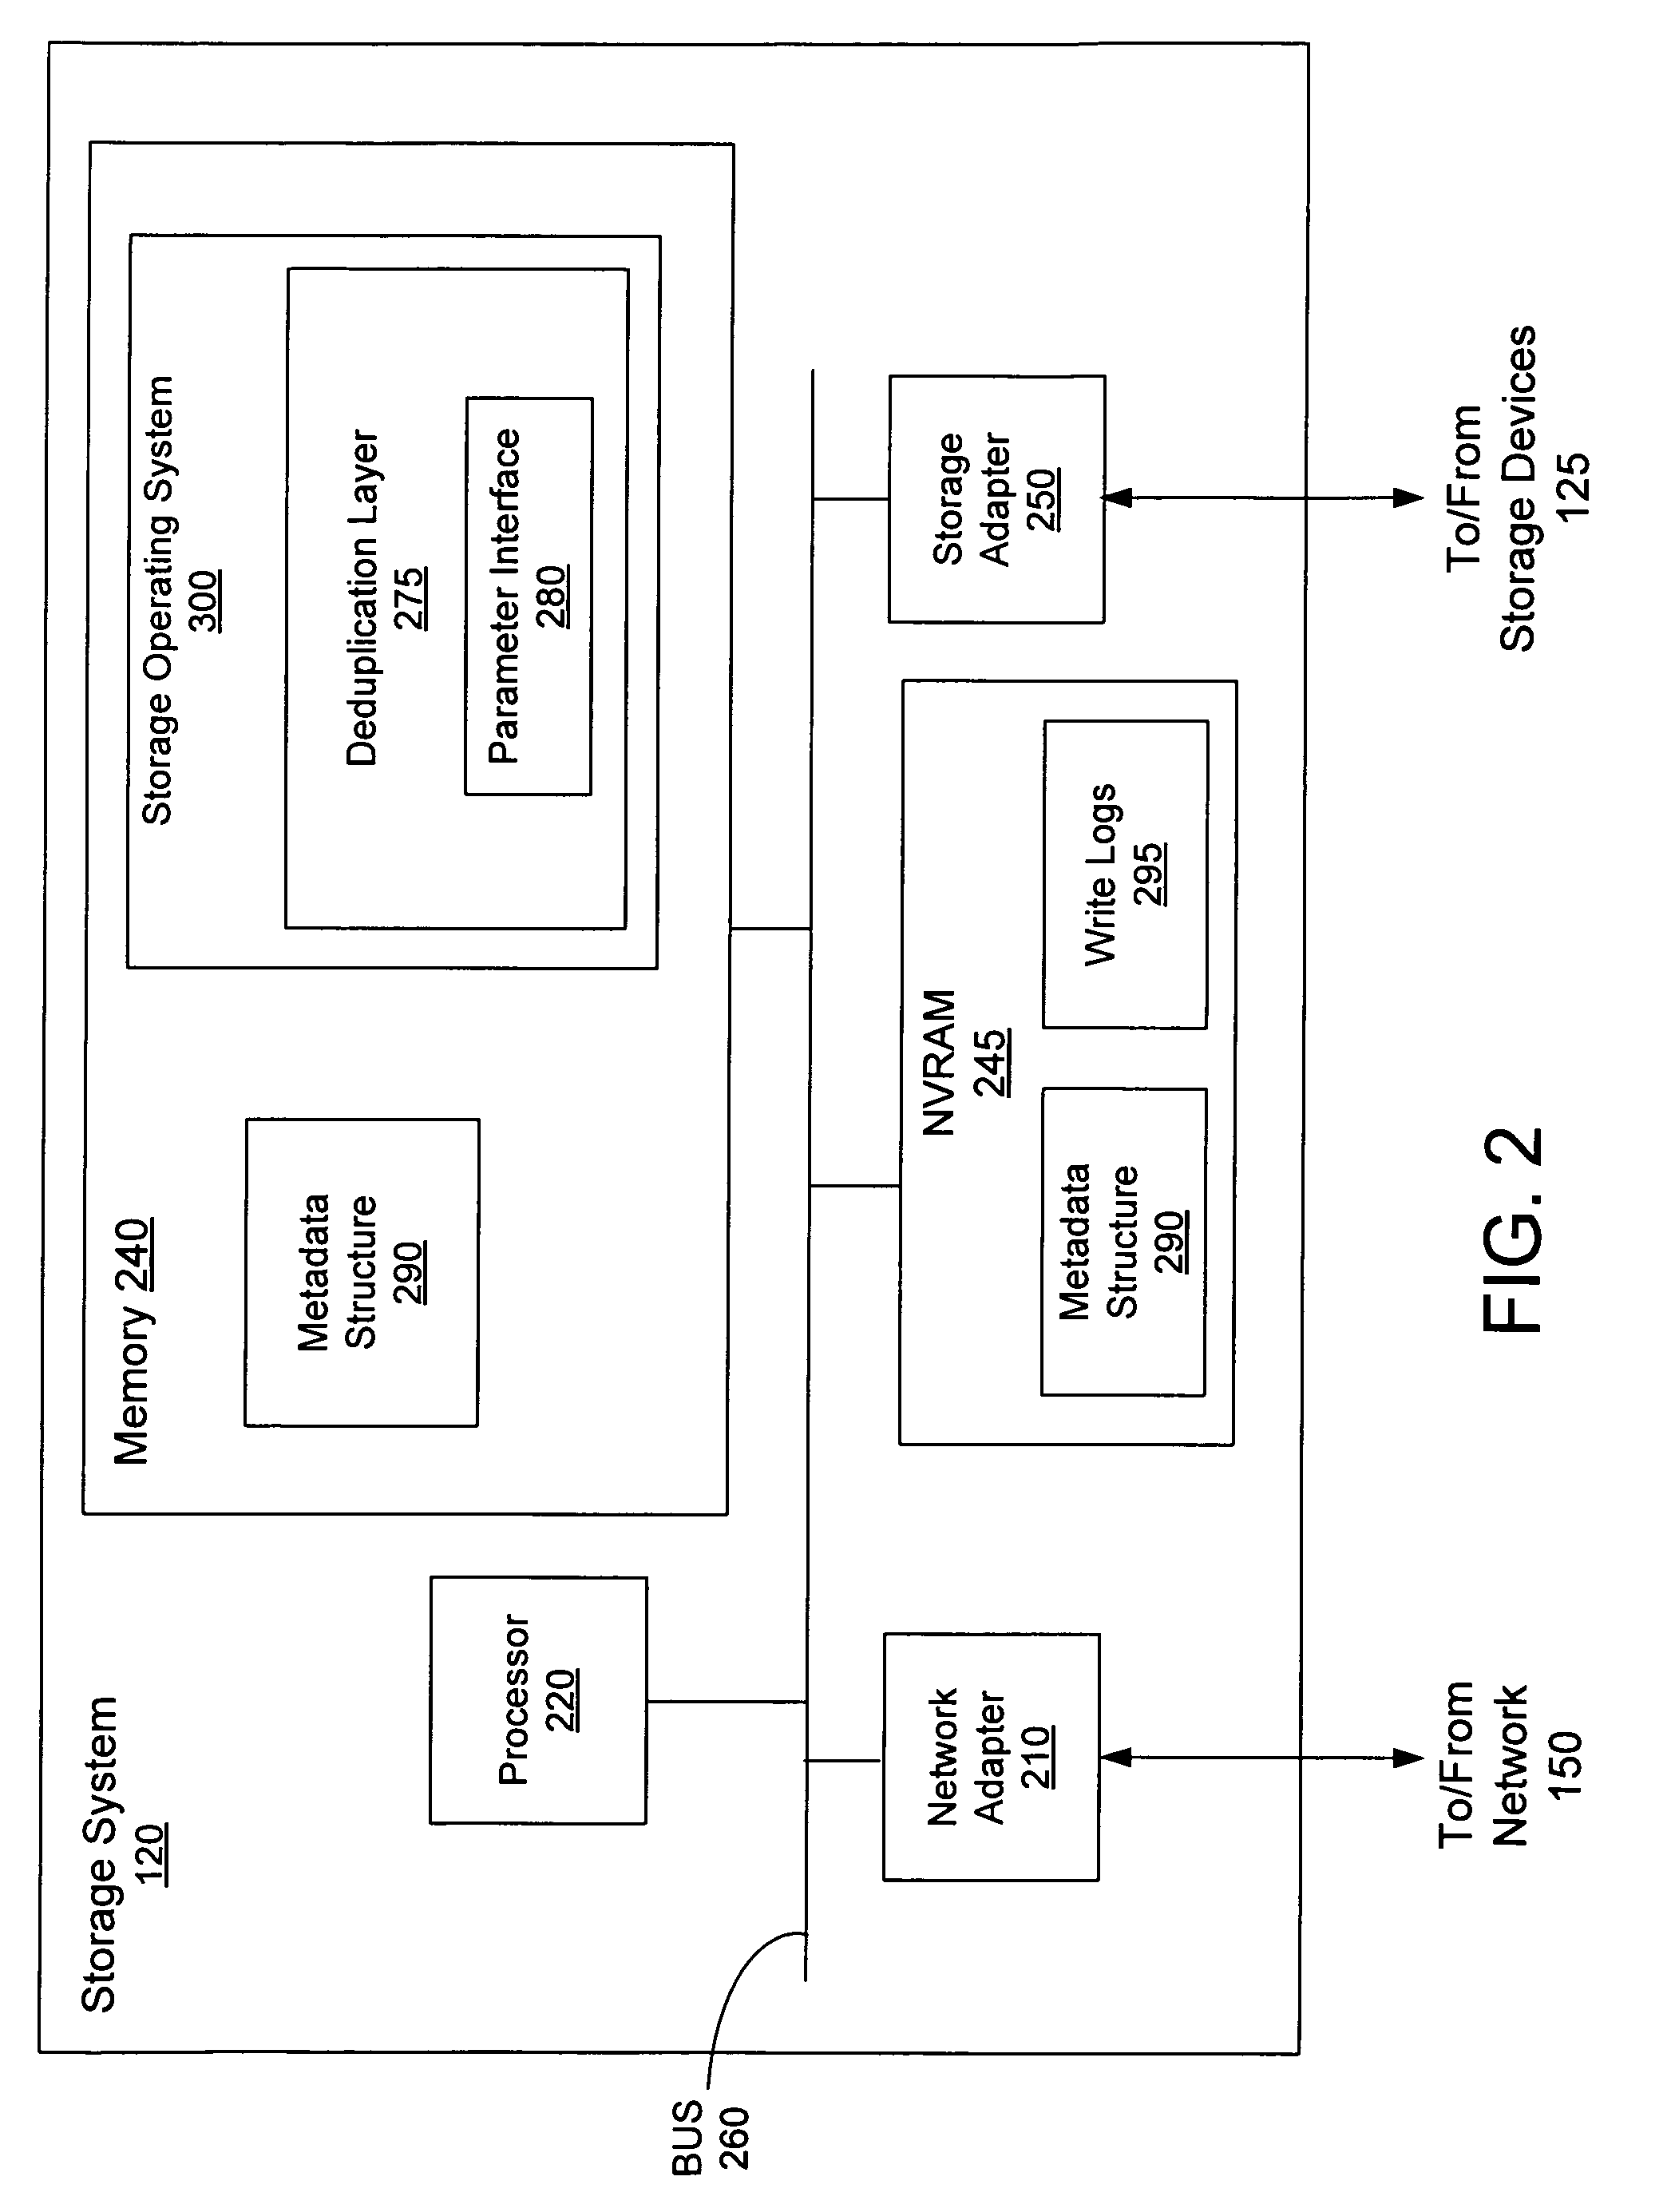 Deduplication of Data on Disk Devices Based on a Threshold Number of Sequential Blocks